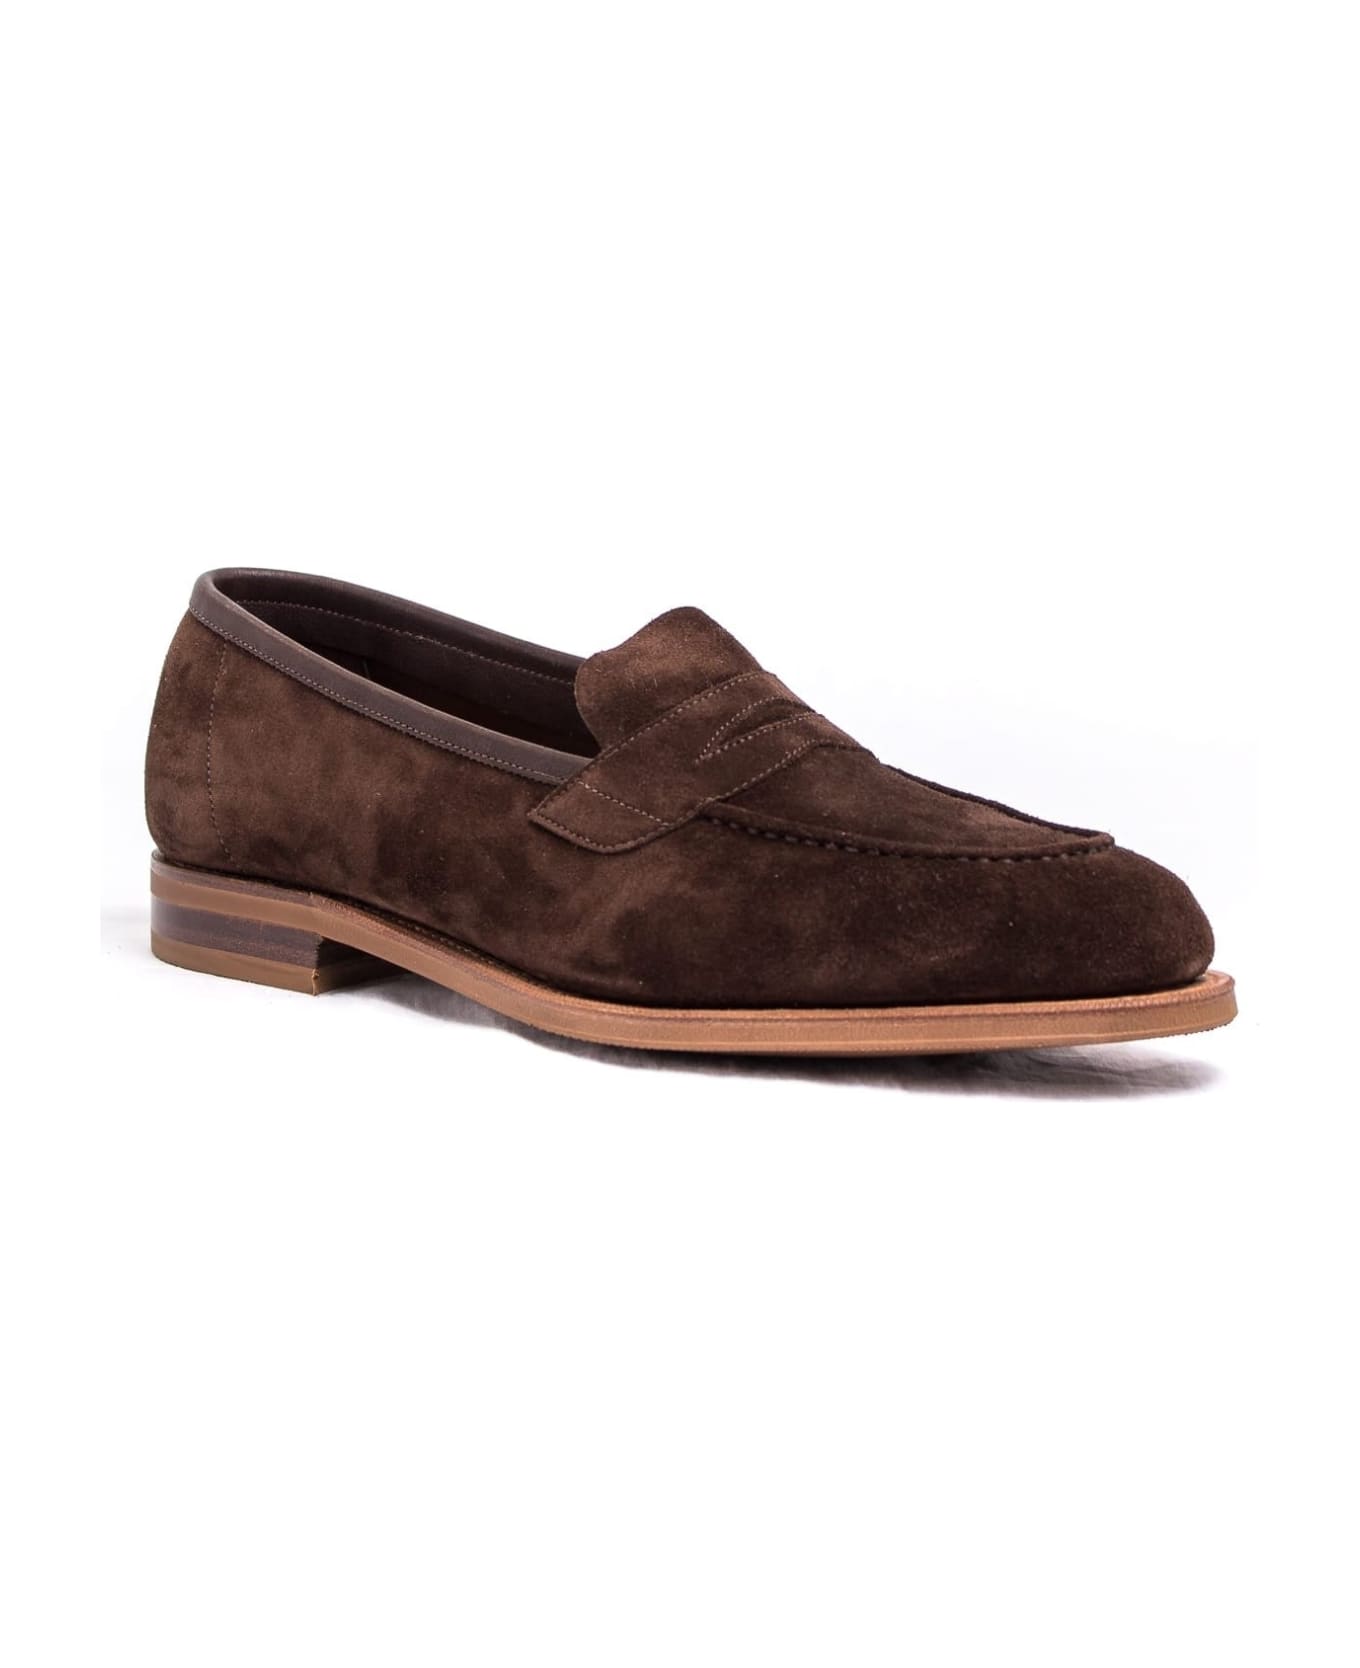 Edward Green Ventnor Mocca Suede E184 Loafer Light Brown Sole - Mocca ローファー＆デッキシューズ